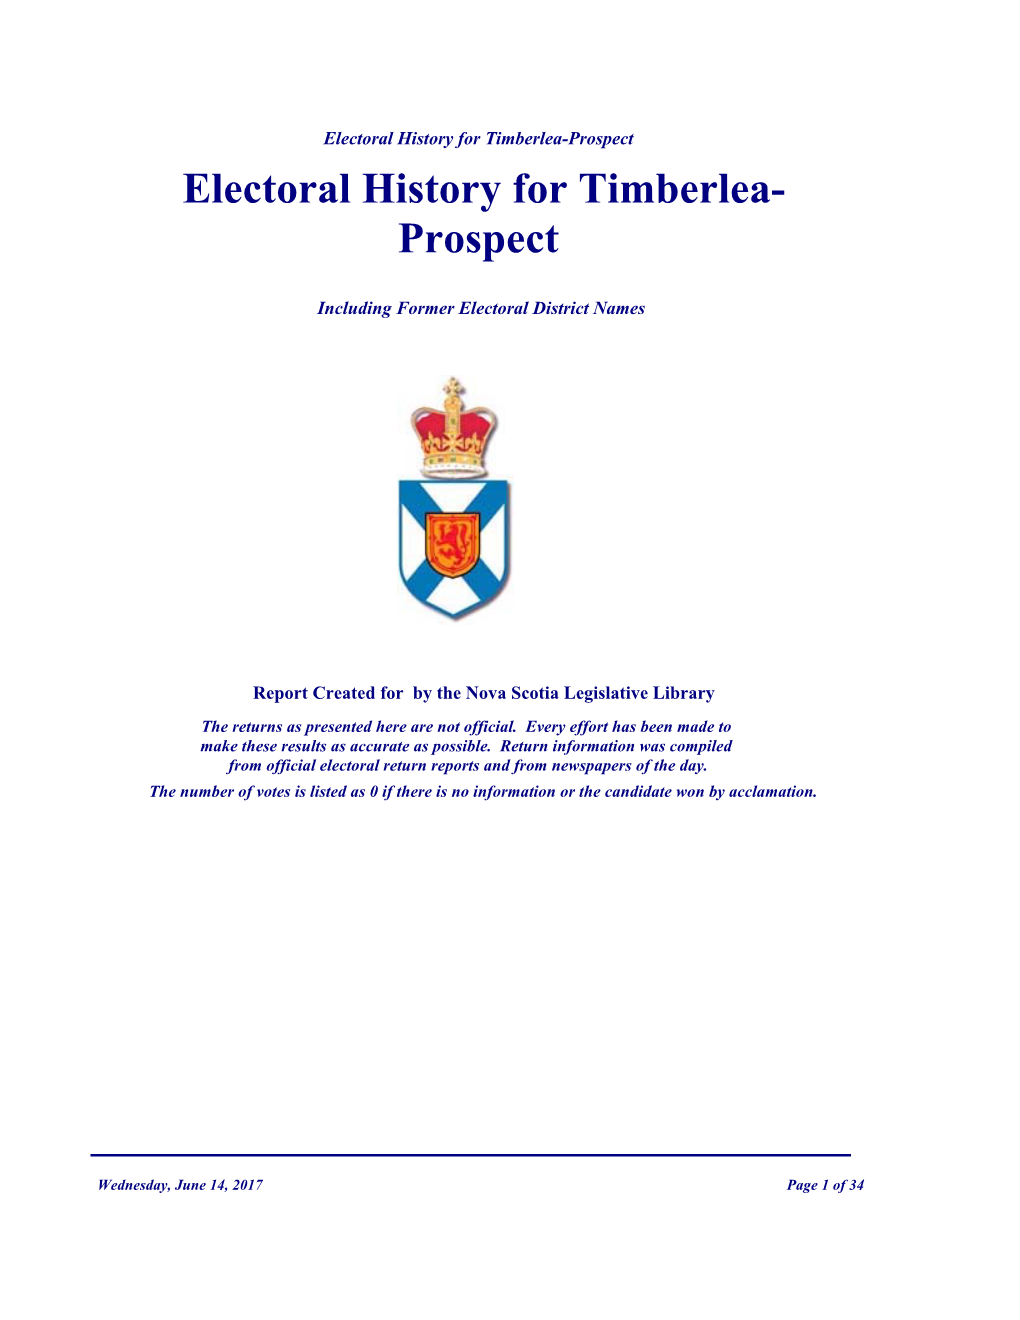 Electoral History for Timberlea-Prospect Electoral History for Timberlea- Prospect